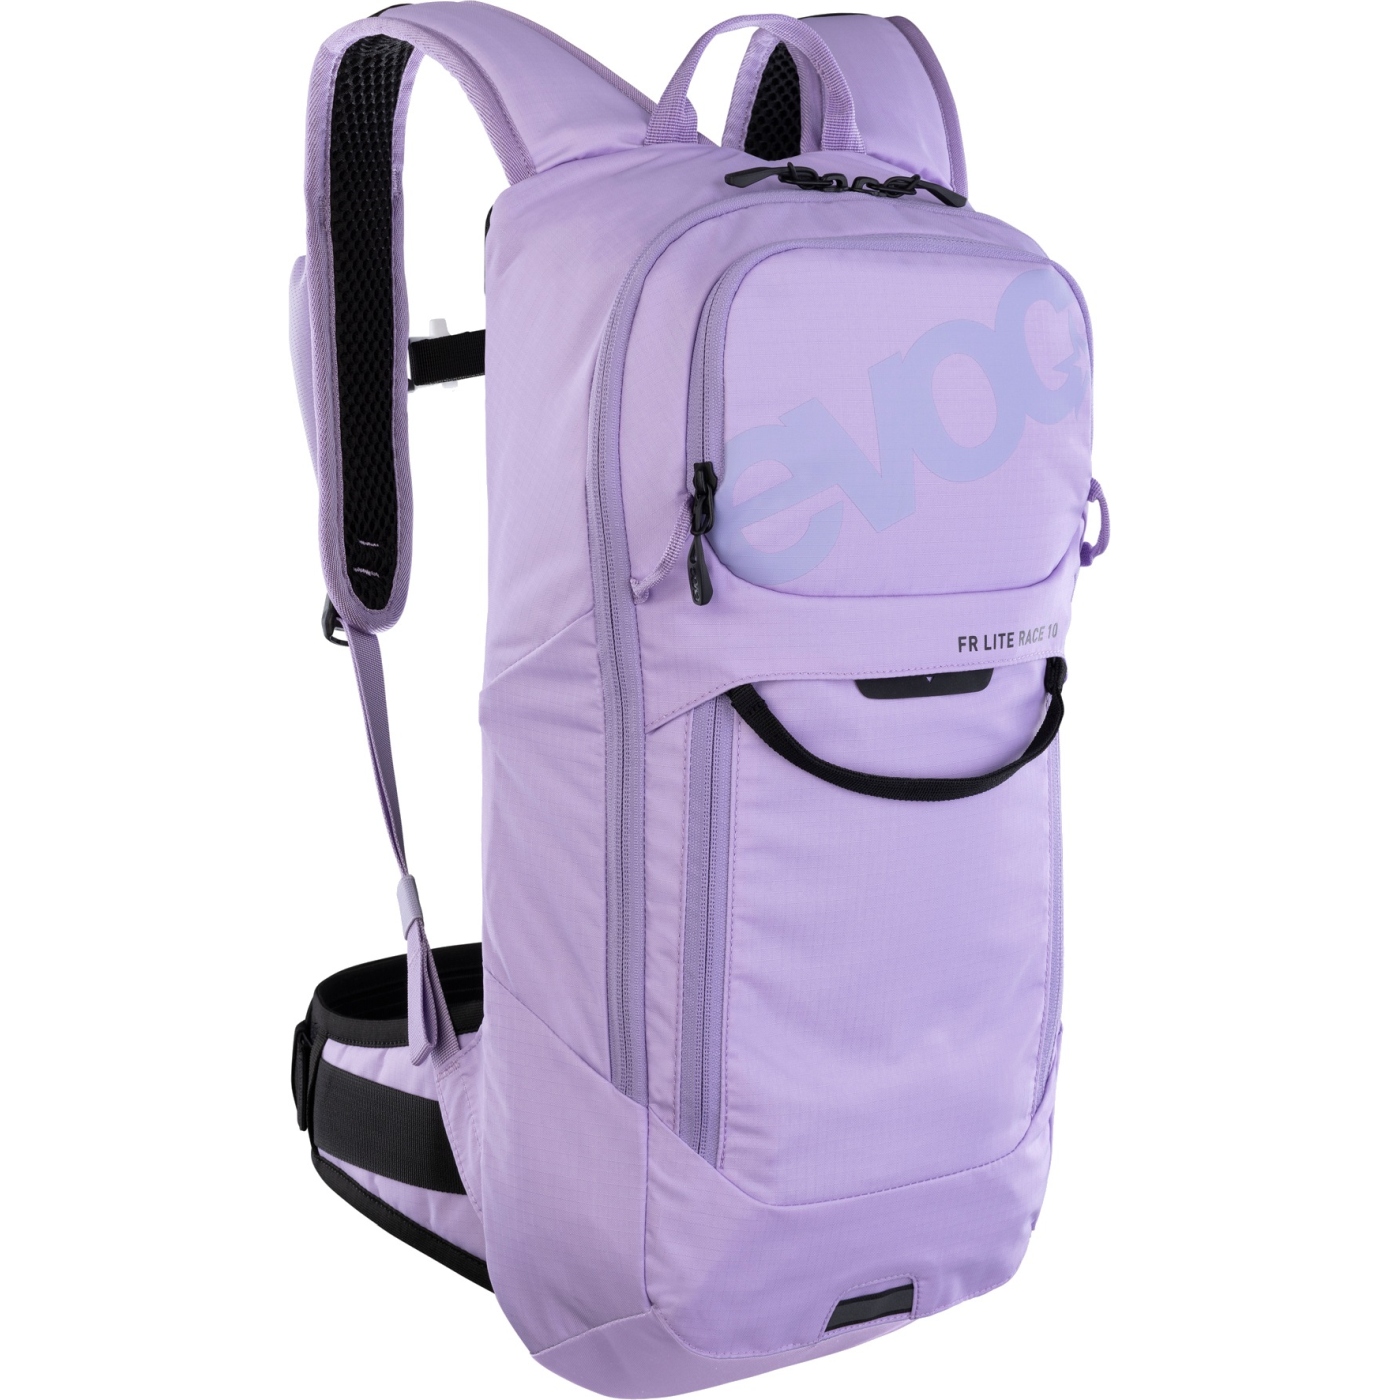 Picture of EVOC Fr Lite Race Protector Backpack - 10 L - Purple Rose